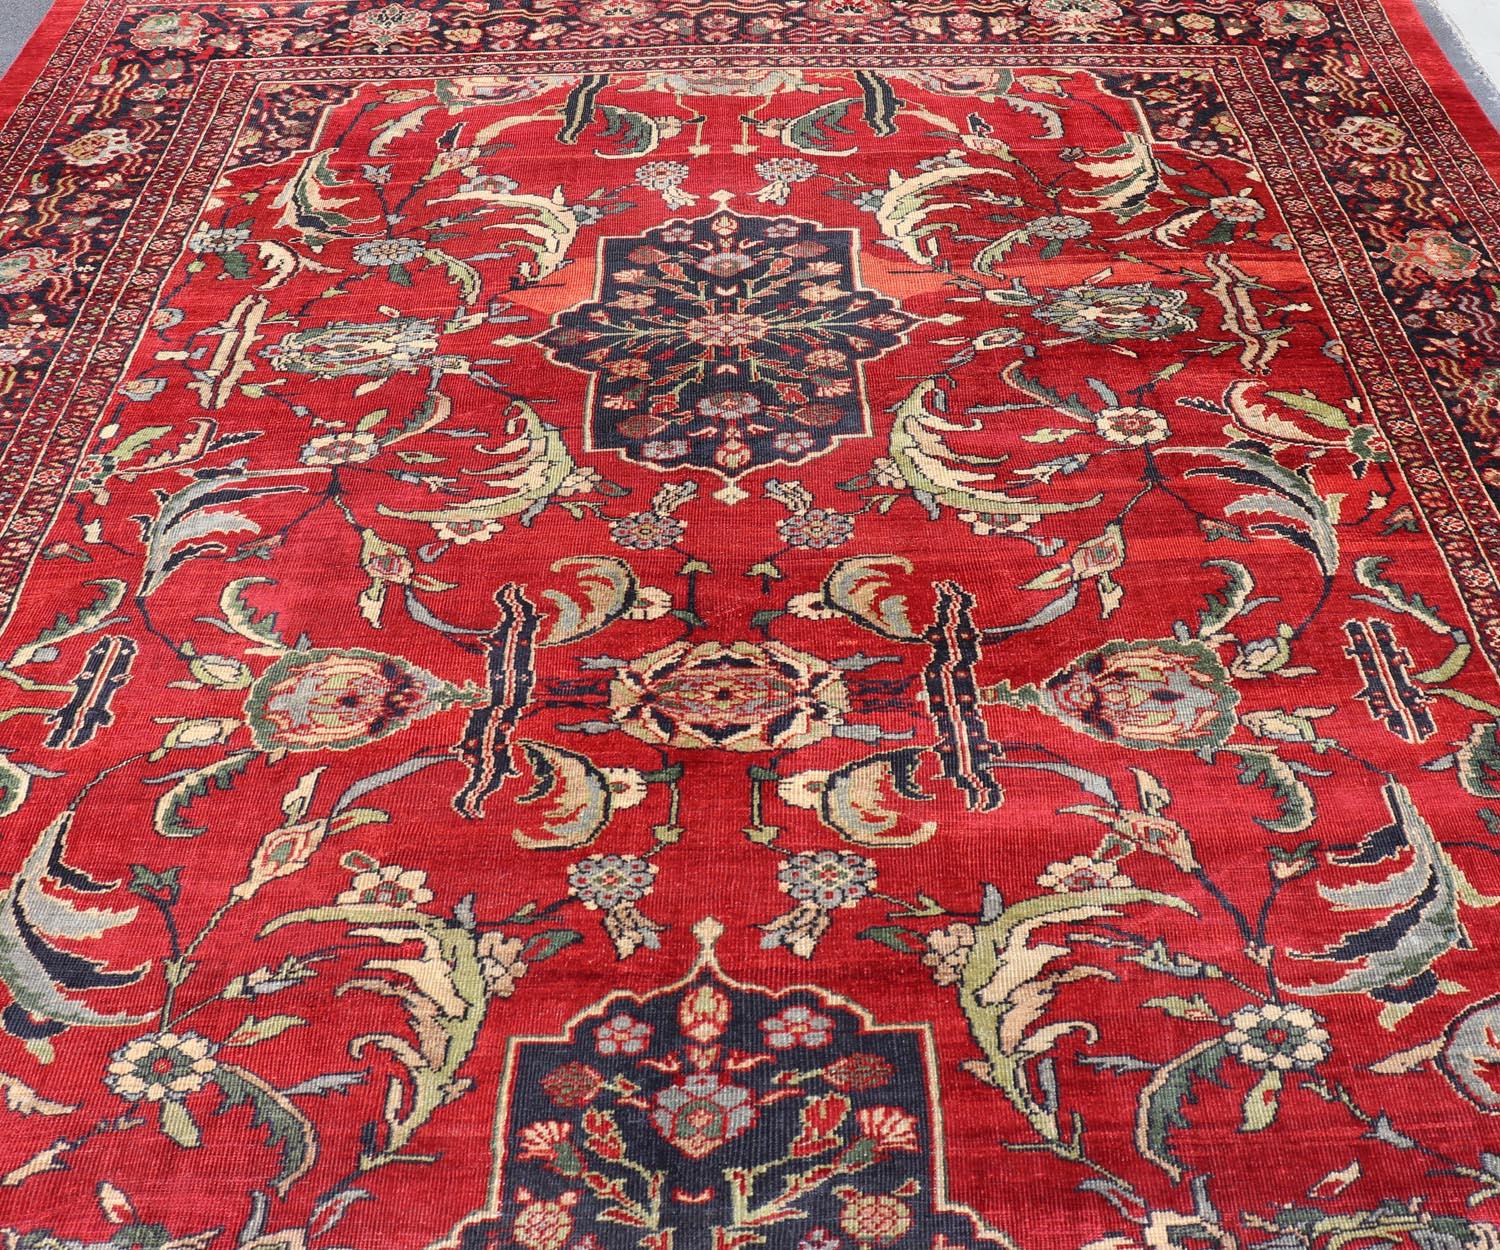 Antique Persian Zeigler Sultanabad Rug with Botanical Elements Set on Red Field For Sale 1